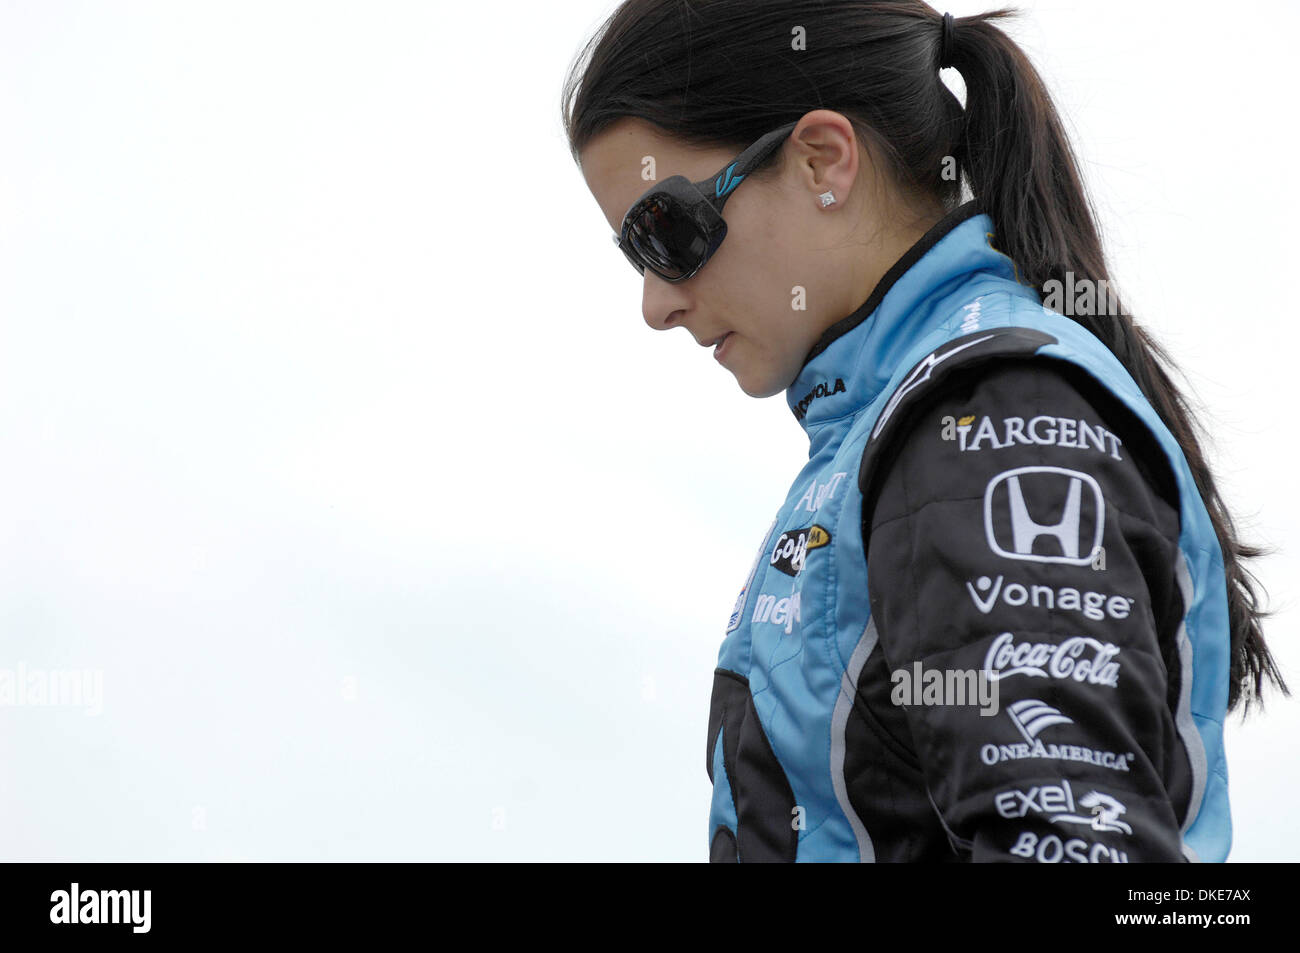 July 8, 2007: Danica Patrick of the Andretti Green Racing Team just prior to the Watkins Glen Grand Prix in upstate New York. Scott Dixon wins his third consecutive Watkins Glen Grand Prix at the 3.4-mile, 11 turn natural road course in the Finger Lakes region of upstate New York. Photo (c) Alan Schwartz / Cal Sport Media.(Credit Image: © Alan Schwartz/Cal Sport Media) Stock Photo